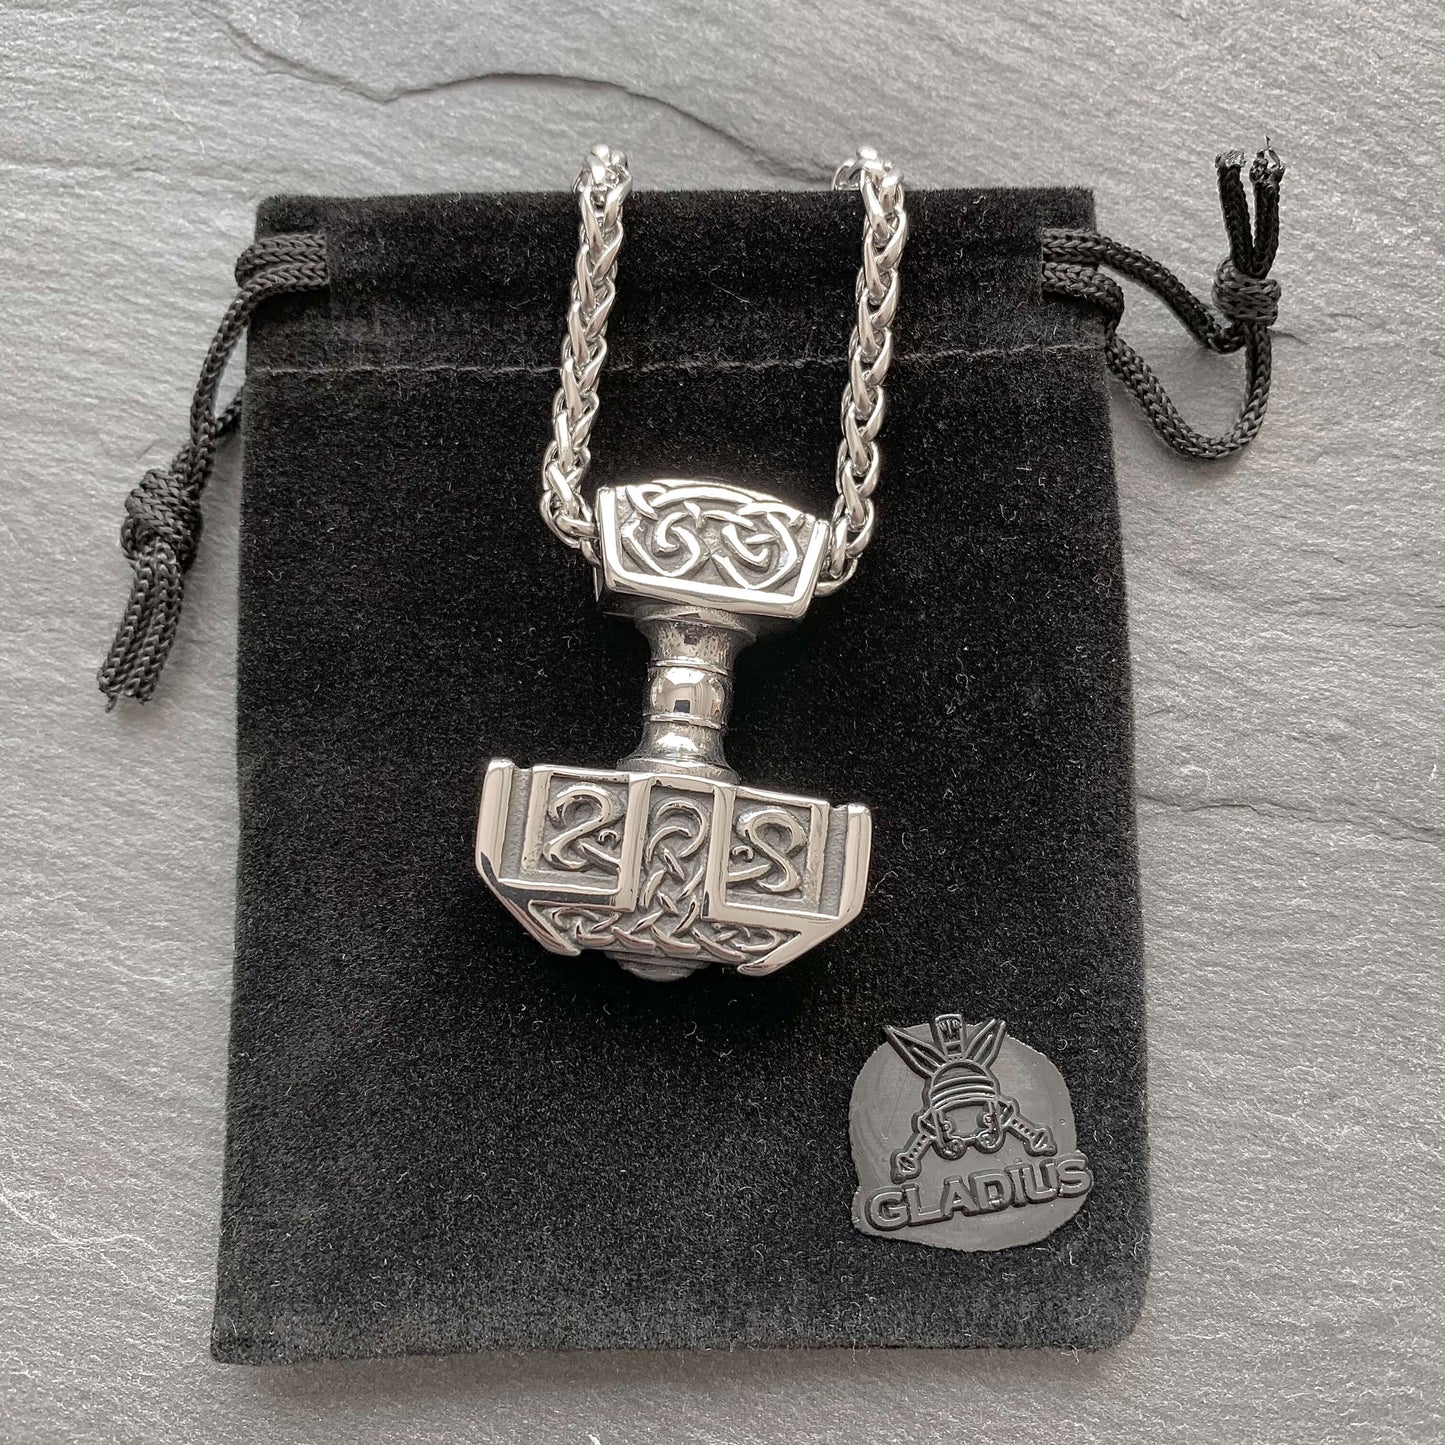 Thor Necklace